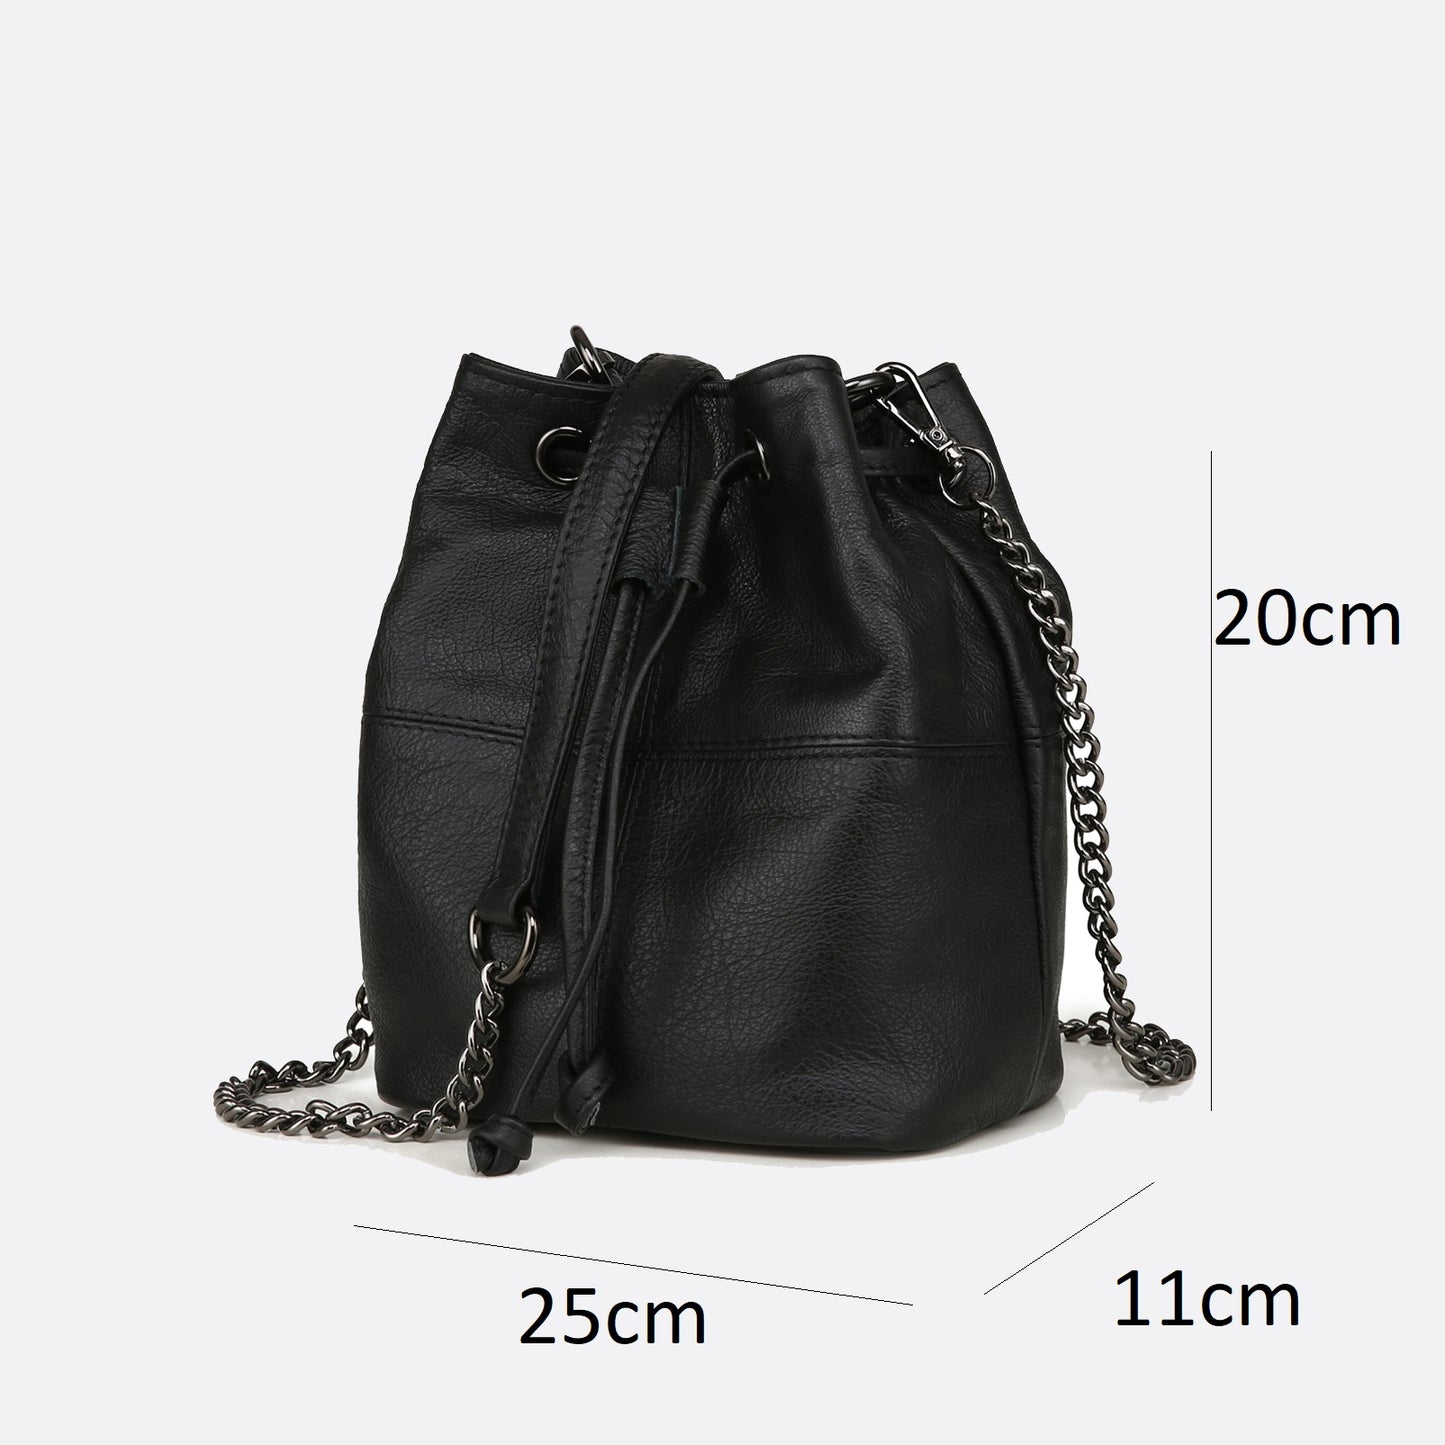 Women's genuine cowhide leather mini bucket bag with 2 straps